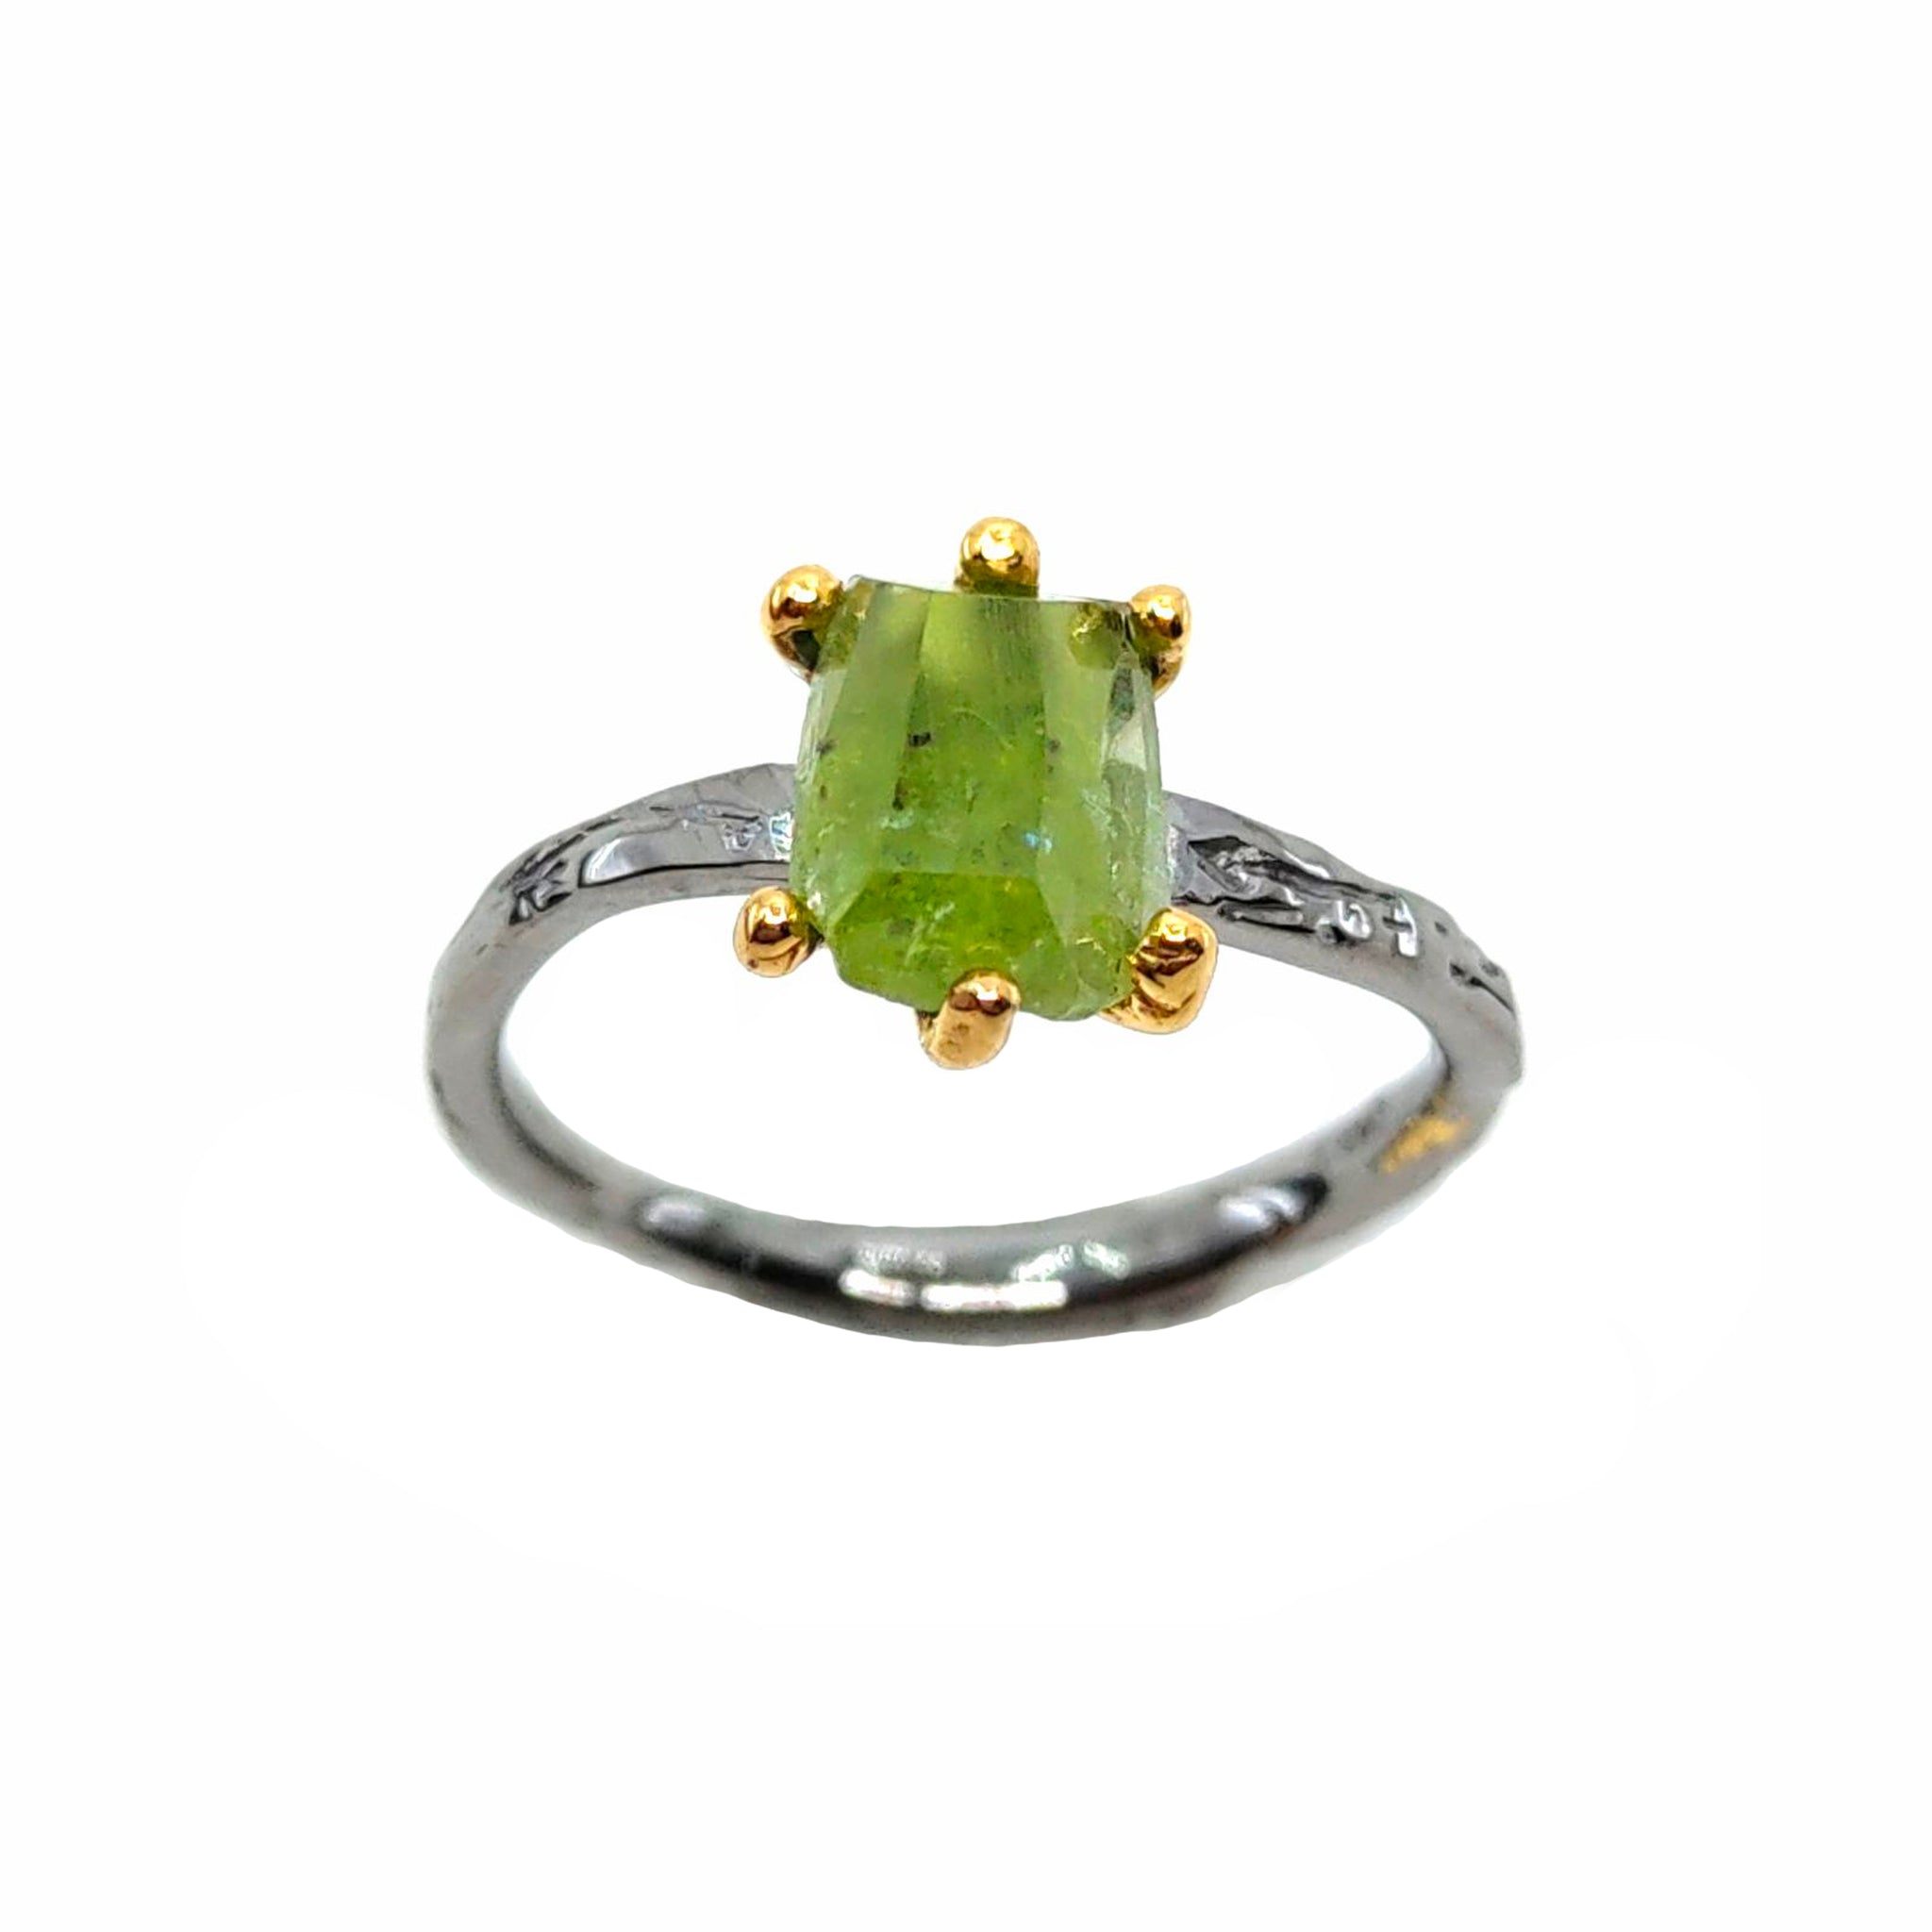 Rough Stone - 925 Sterling Silver Ring, Rough Faceted Peridot, Plated with 3 Micron 22K Yellow Gold and Grey Ruthenium